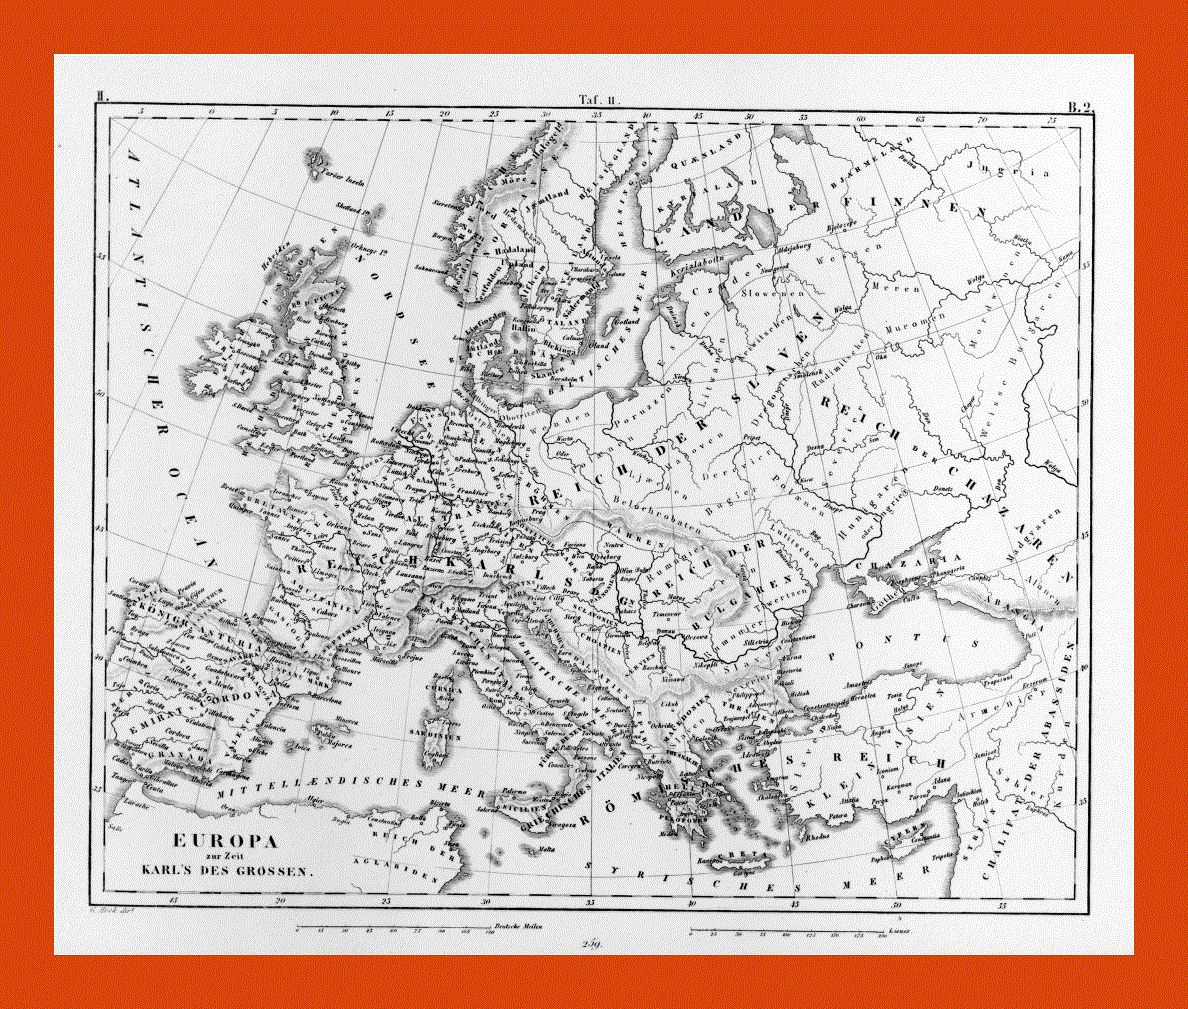 Old map of Europe - 1851